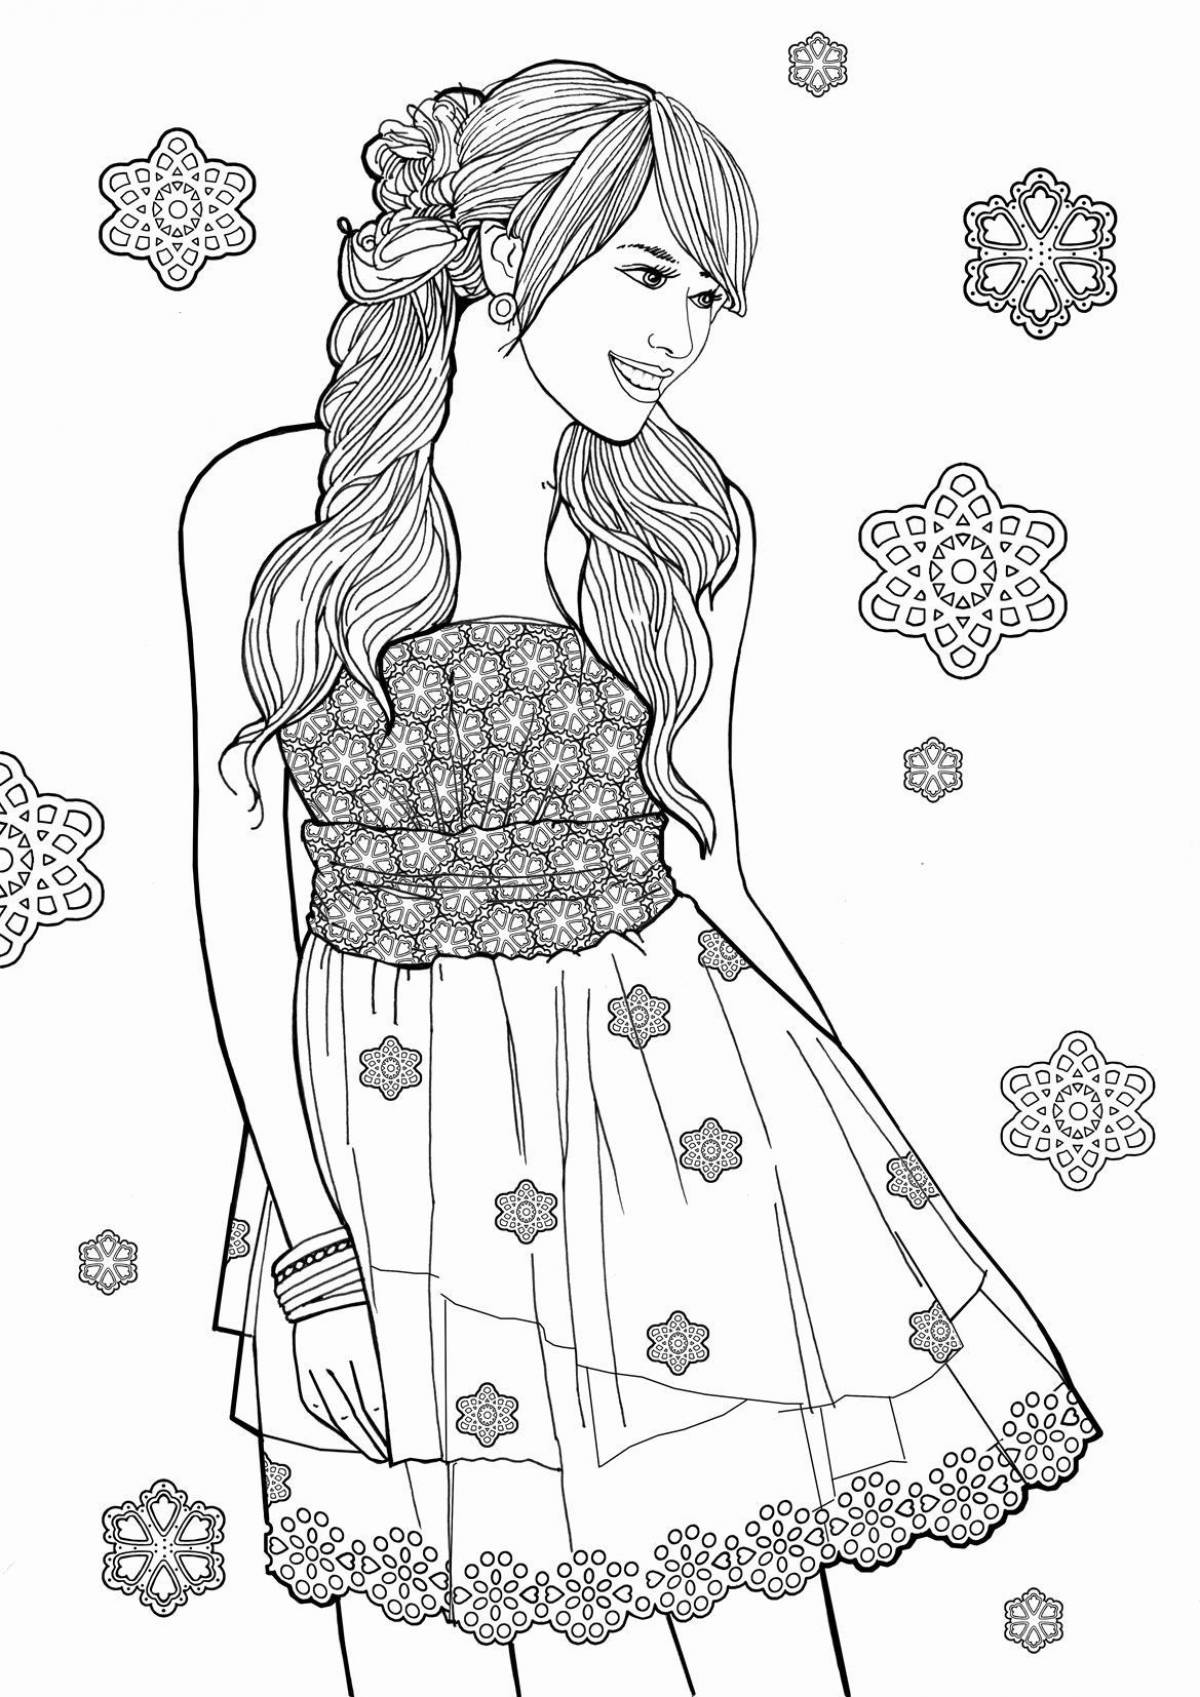 Fascinating coloring book for girls of all ages